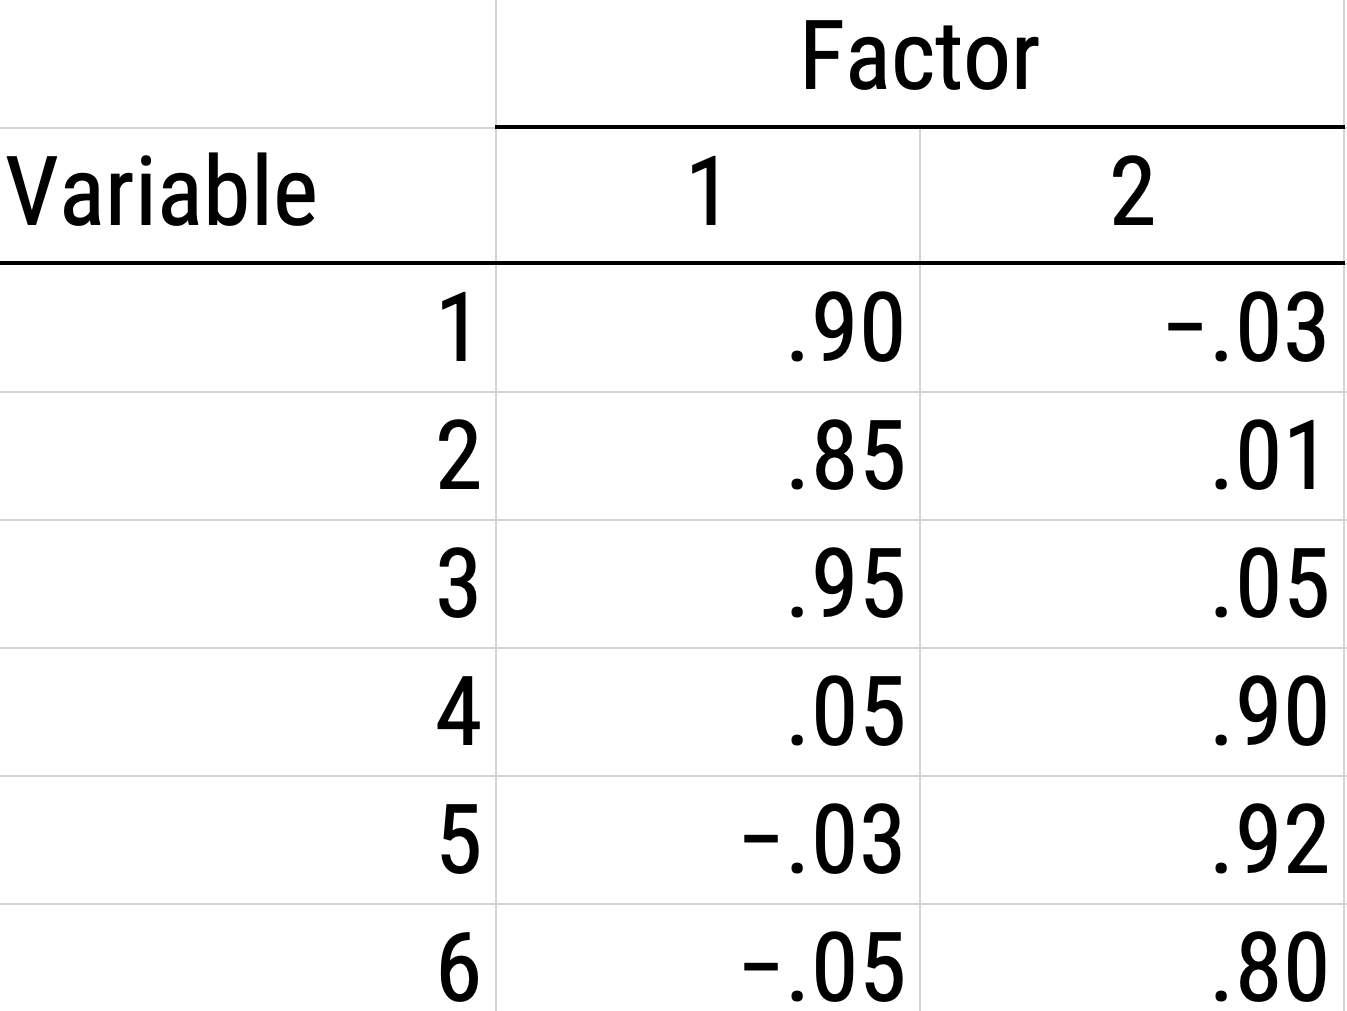 Example of a Rotated Factor Matrix.